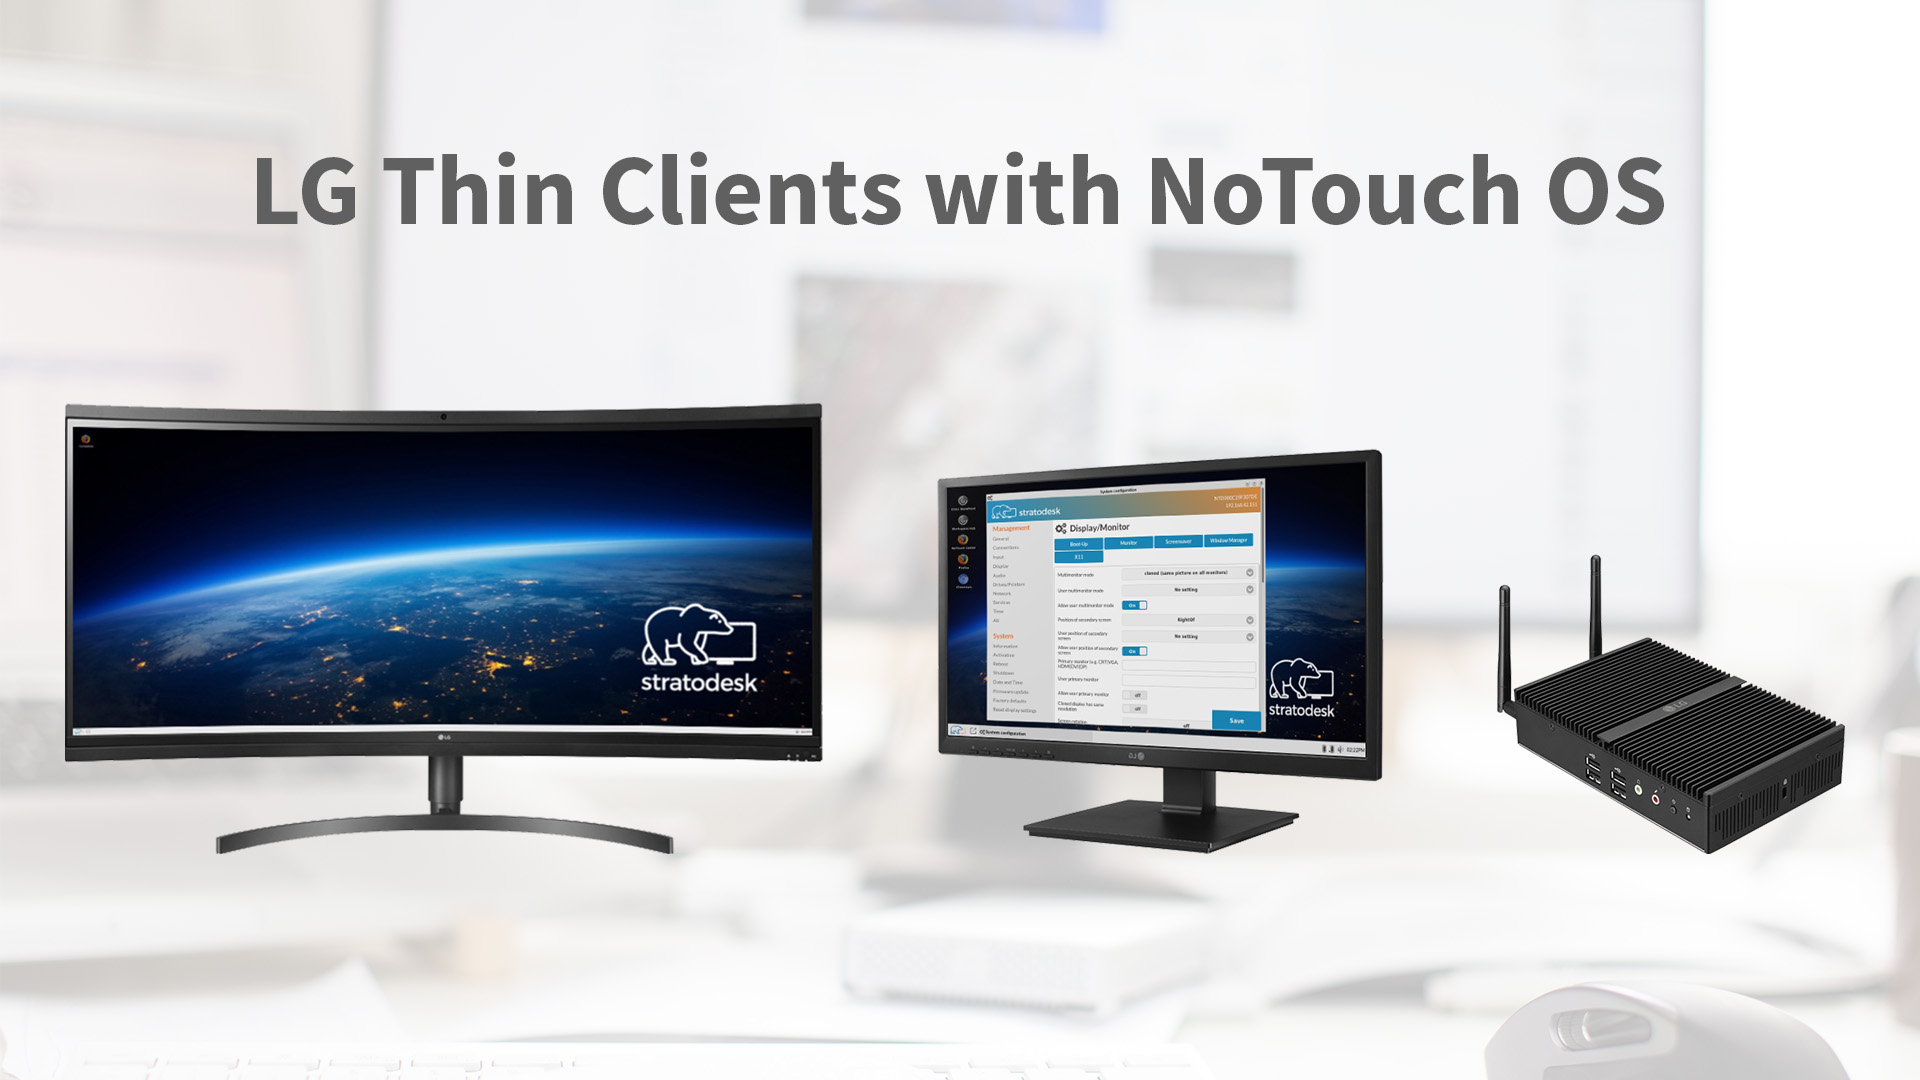 NoTouch Thin Clients